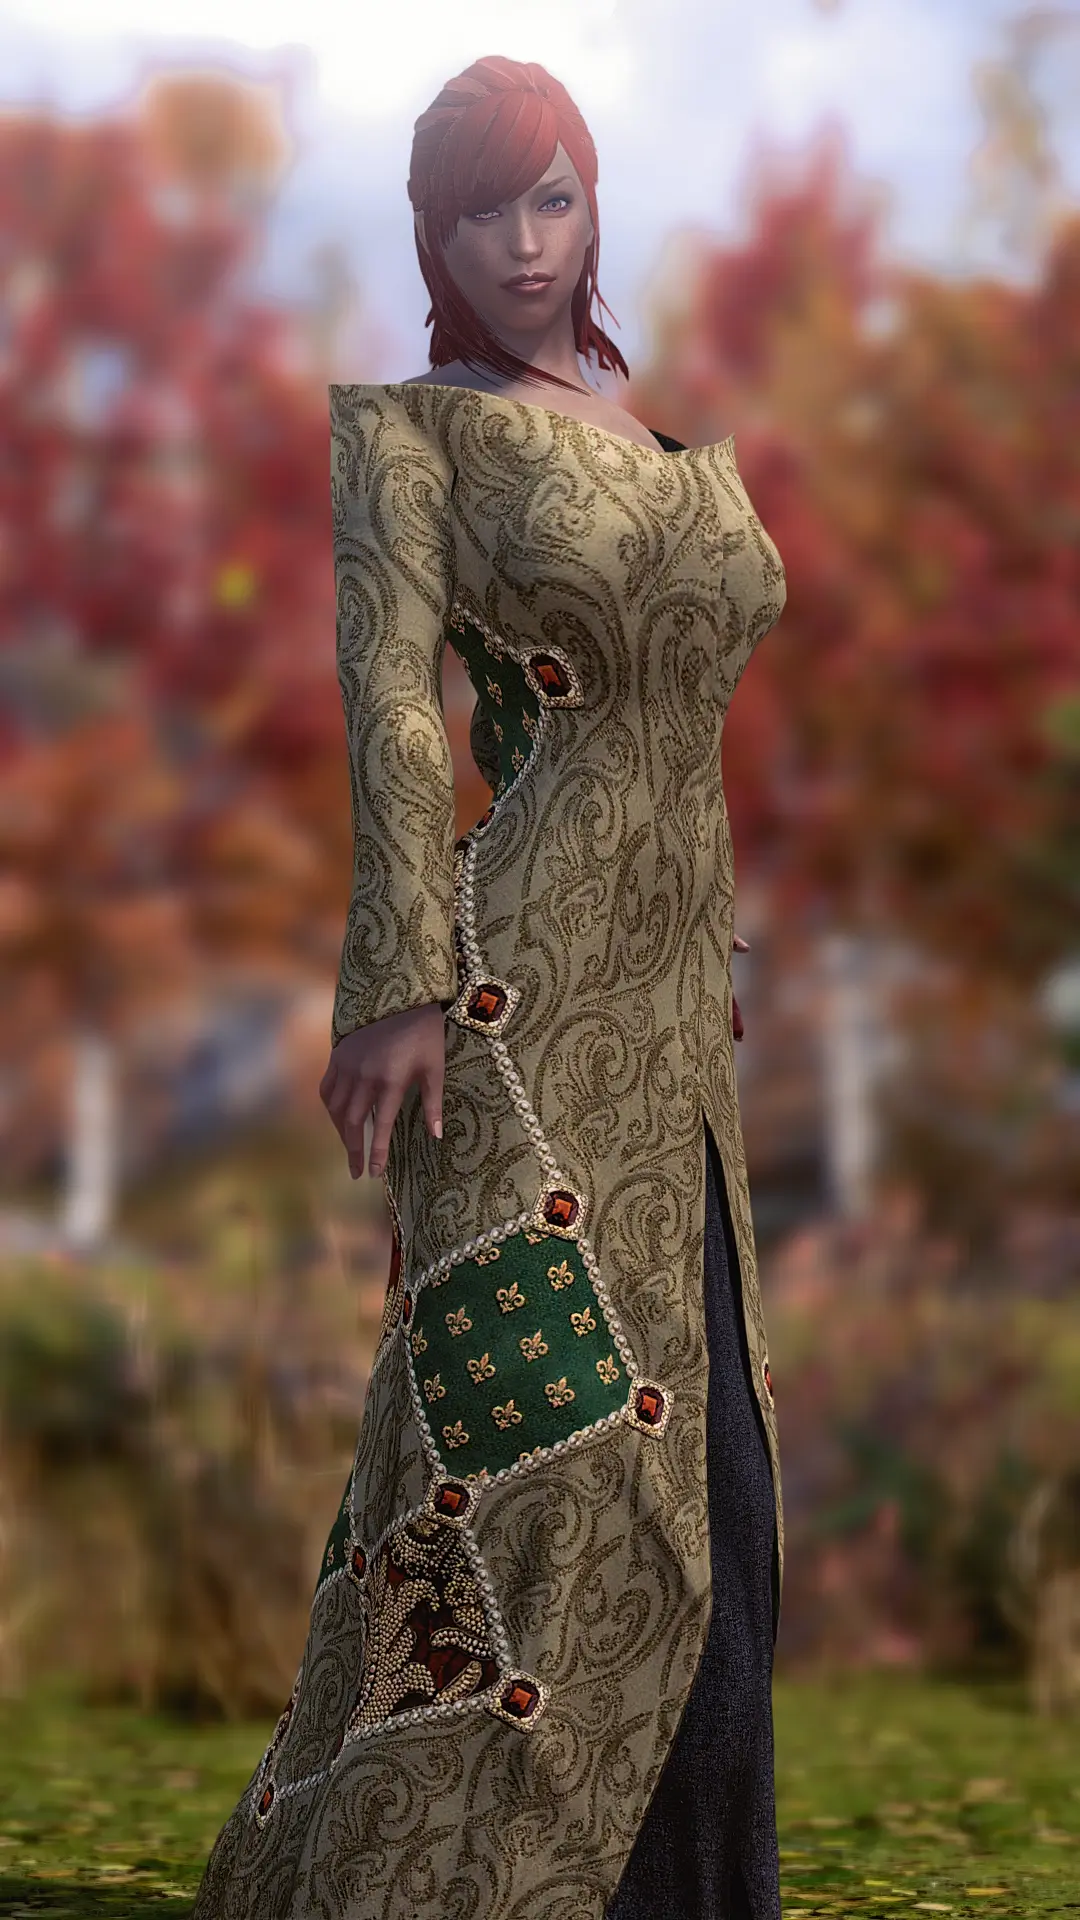 Noblesse Oblige And Noble Dress Sse Cbbe Bodyslide At Skyrim Special Edition Nexus Mods And